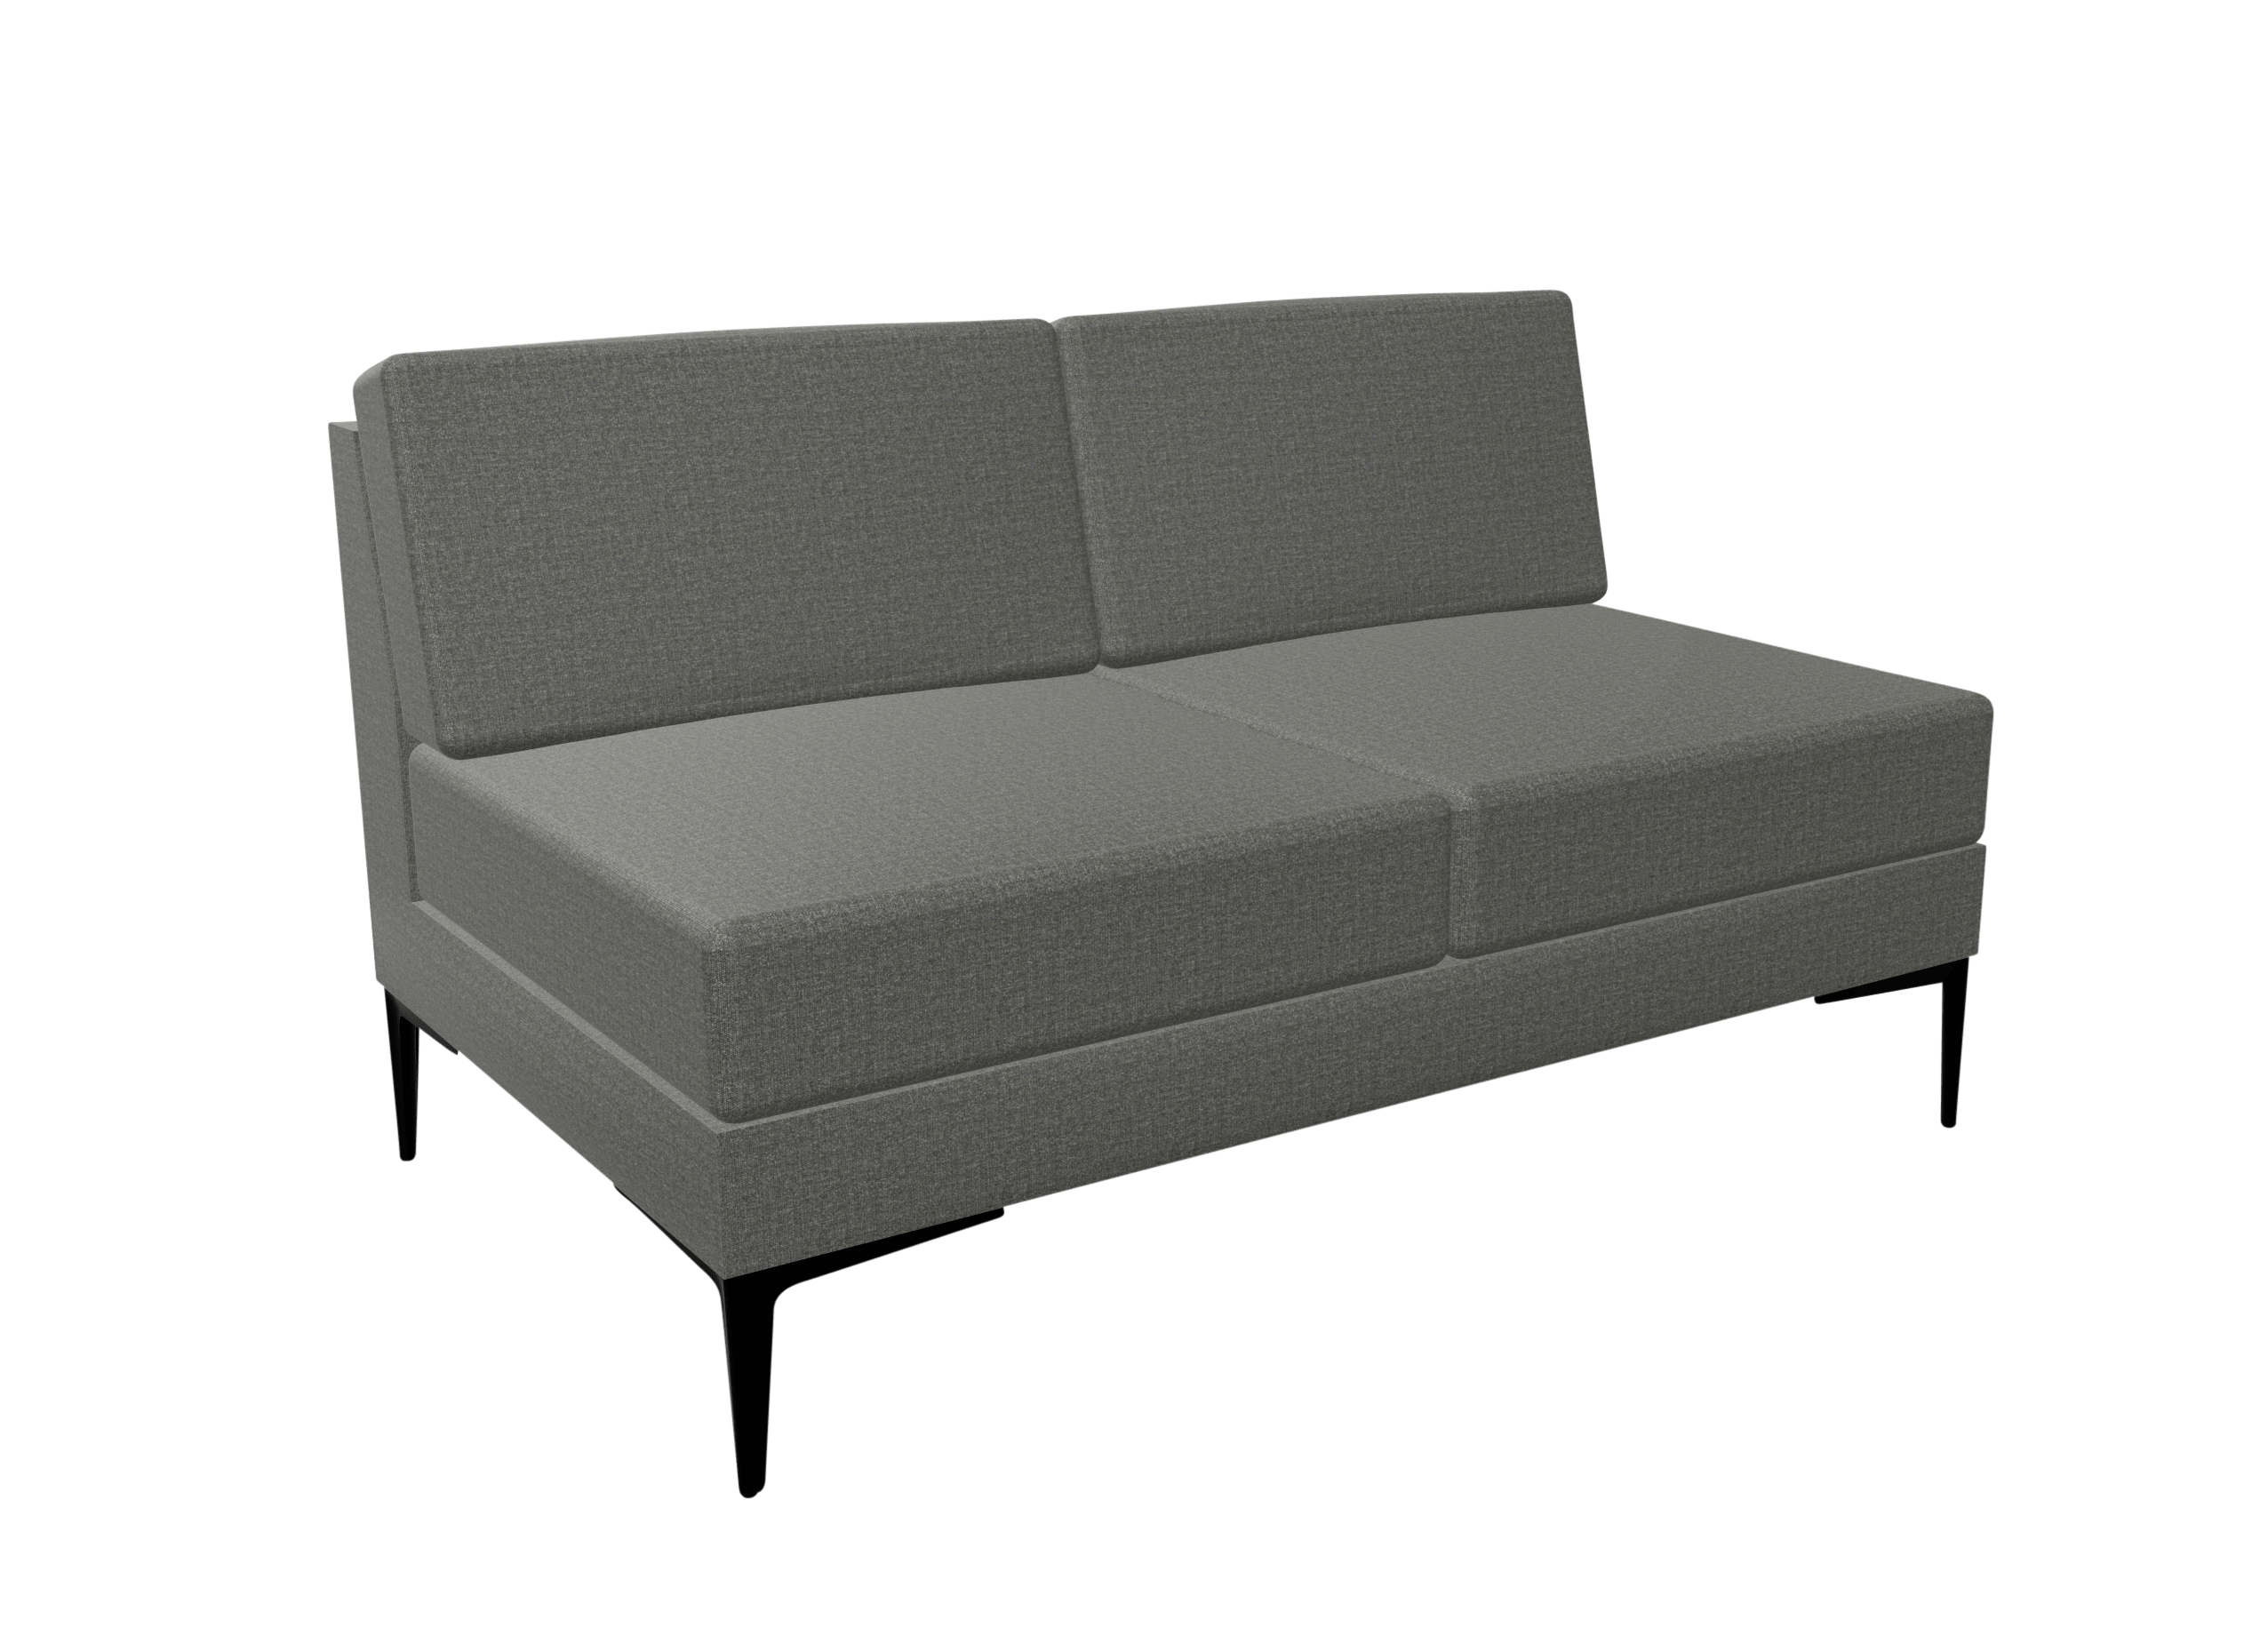 A grey office sofa with black legs .